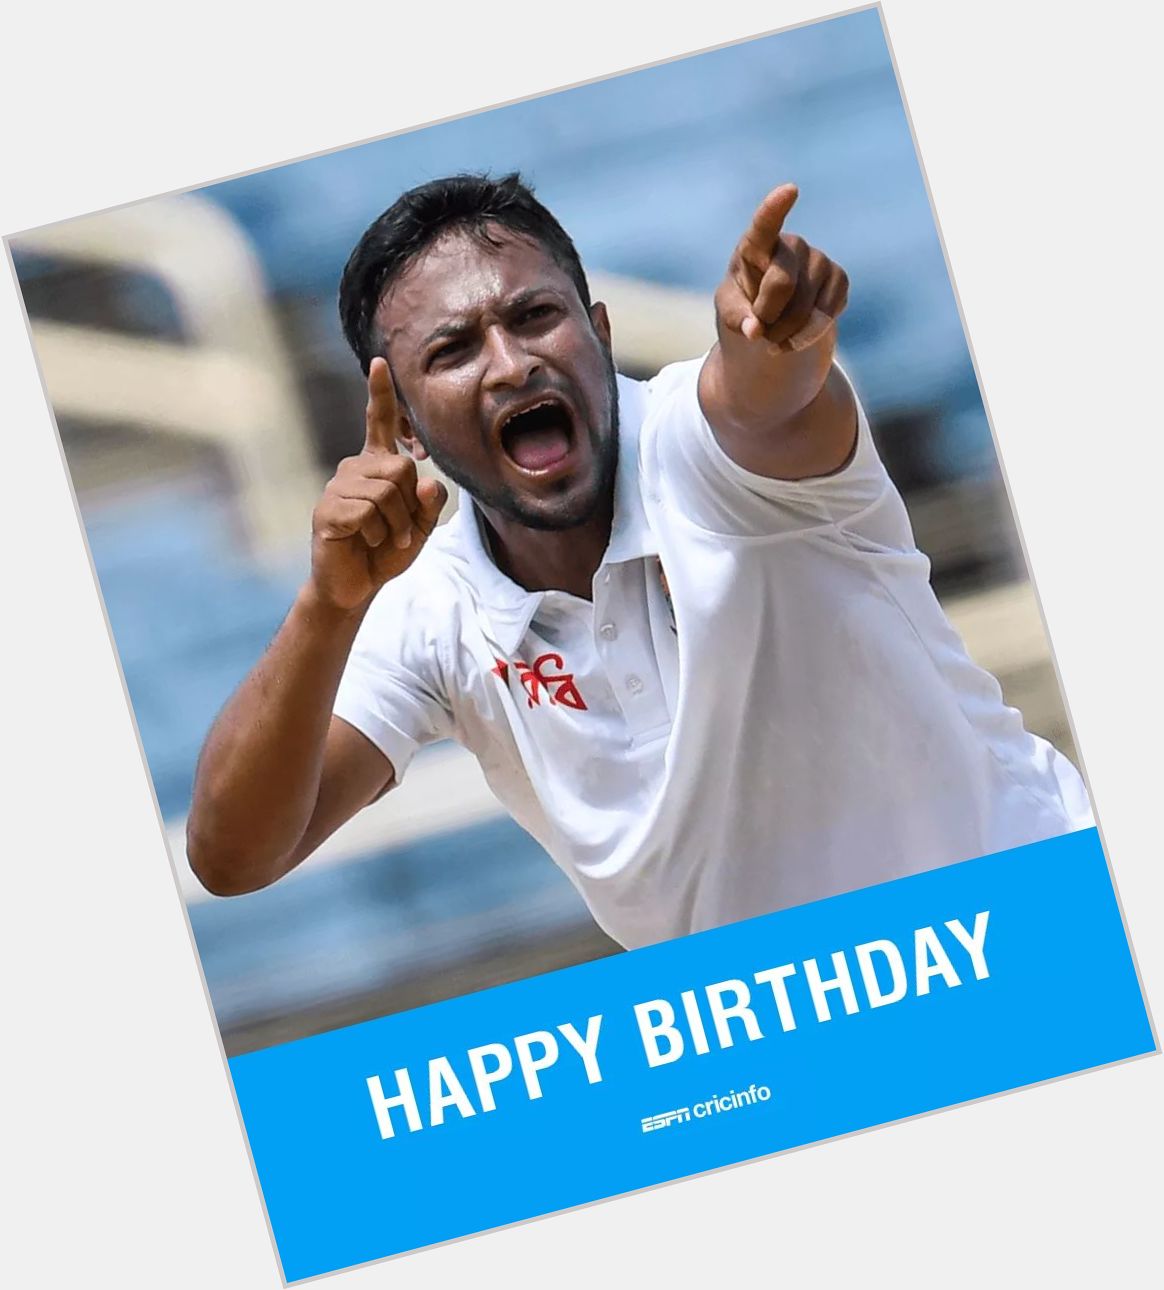  Happy birthday to Shakib Al Hasan, one of the top allrounders in world cricket. 